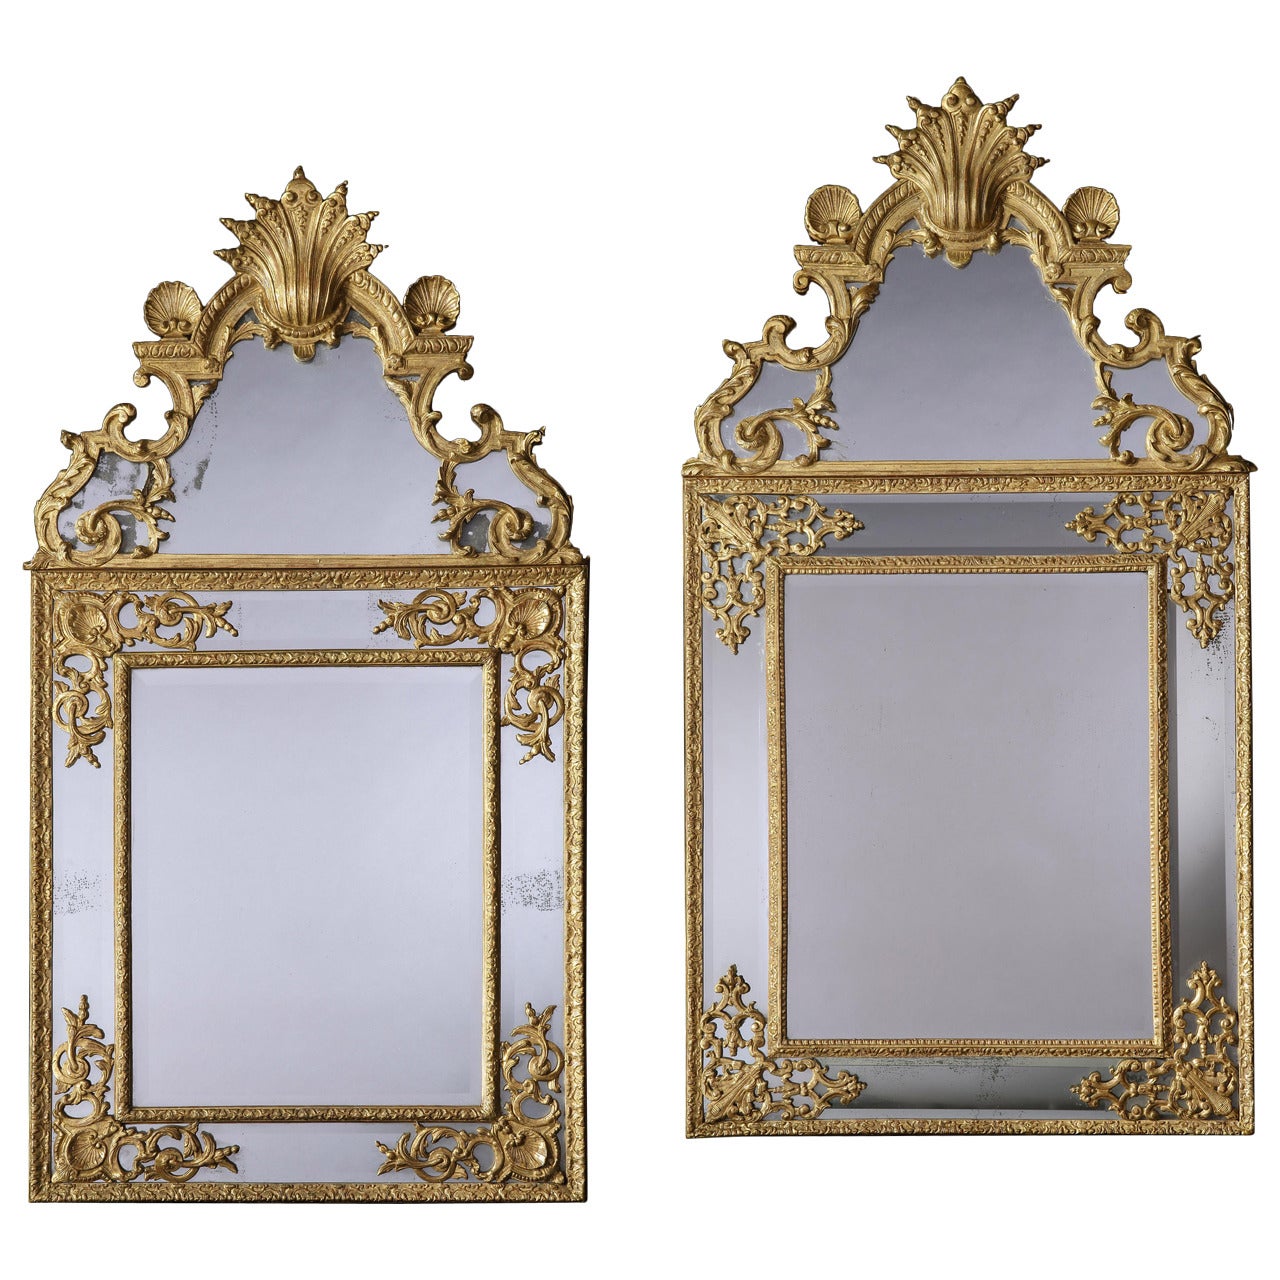 Near Pair of Antique Giltwood Mirrors